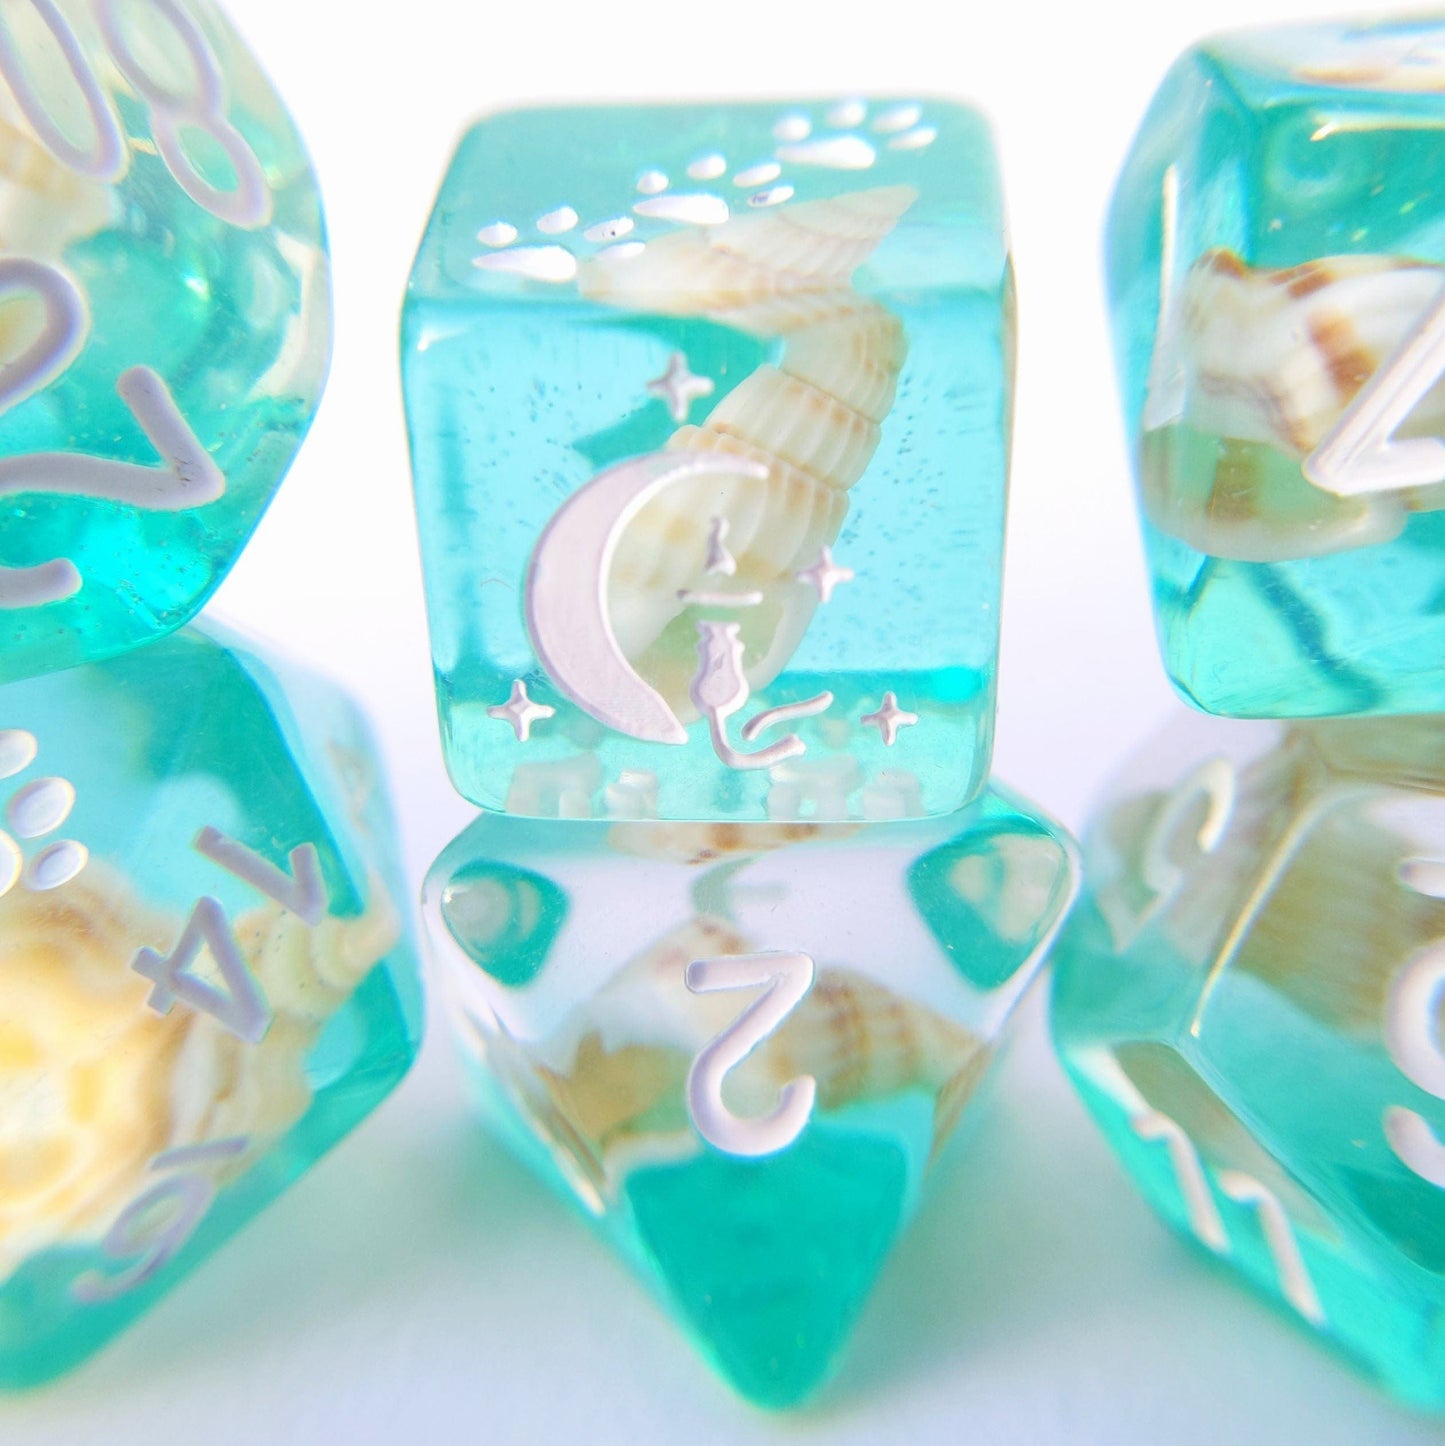 Sea Shell 8 Piece Dice Set. Real tiny sea shells sitting on a layer of teal glittering resin - CozyGamer